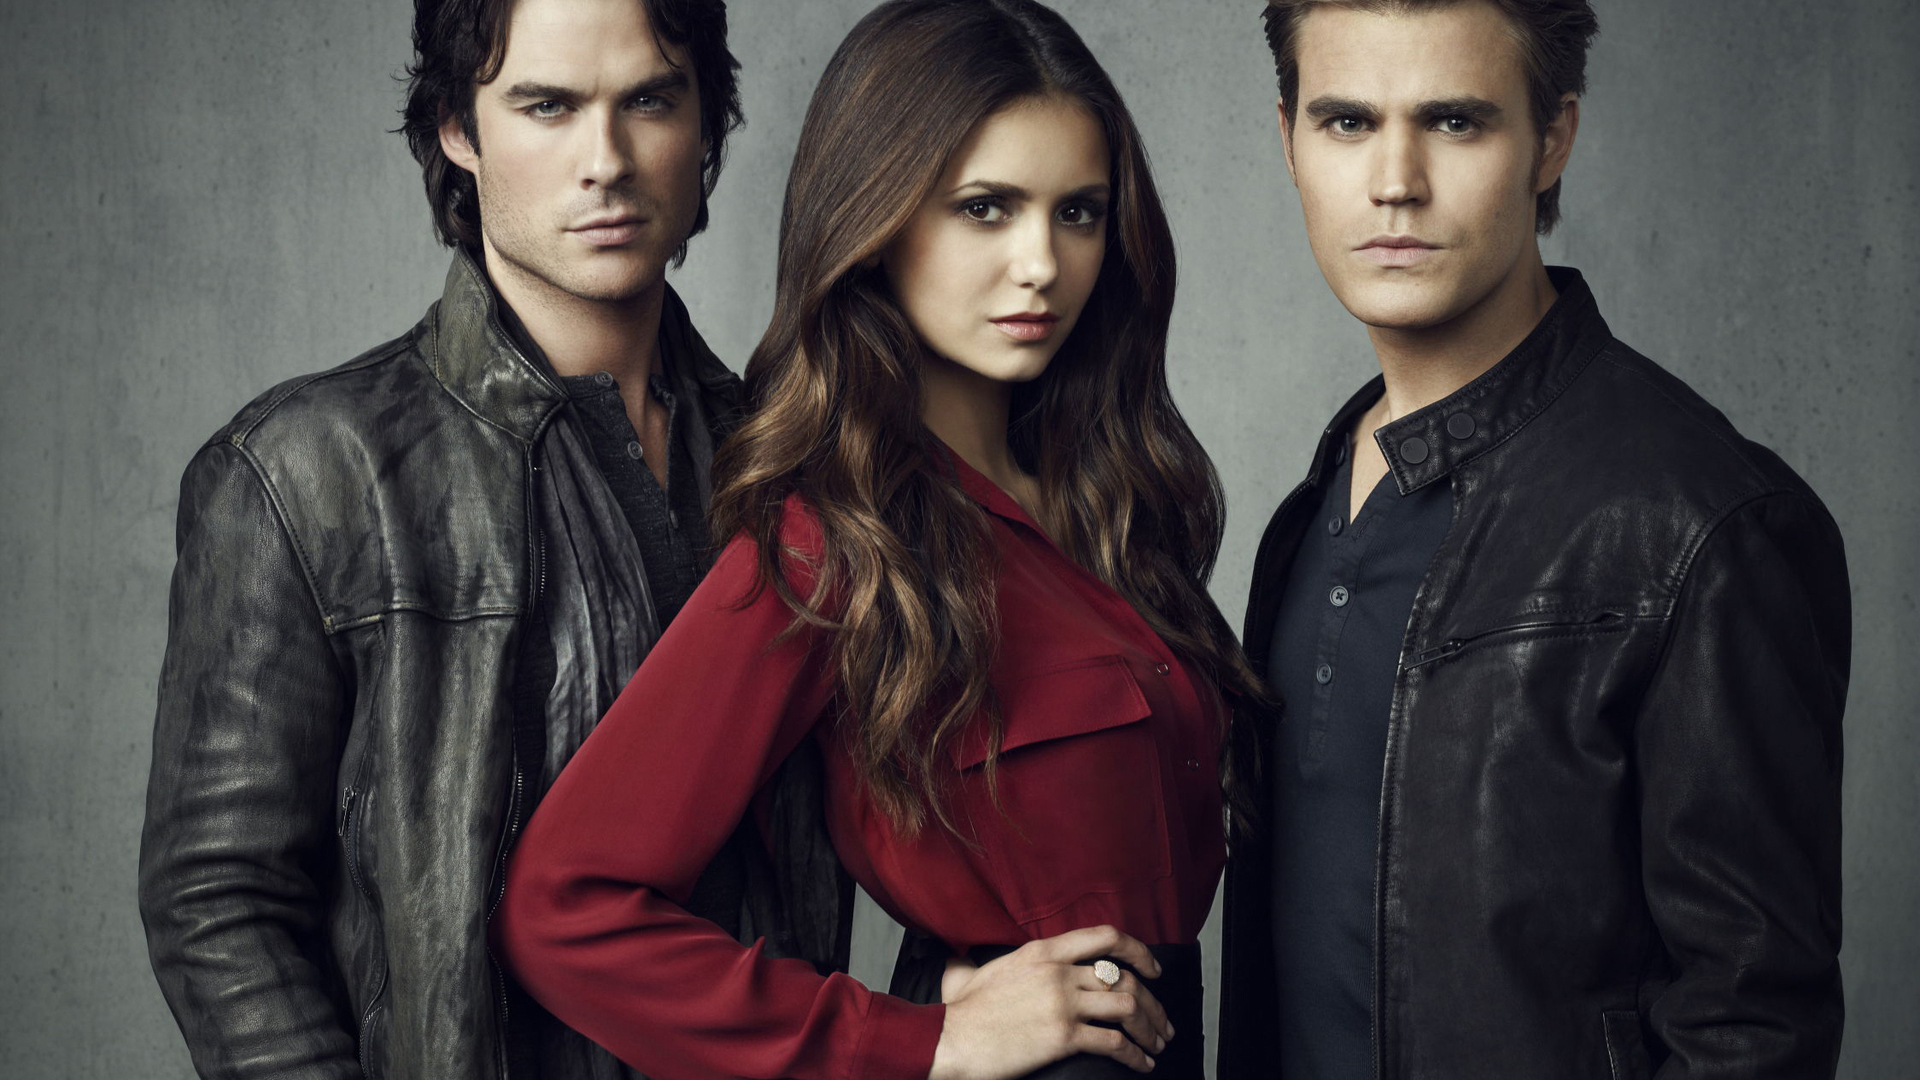 View And Download Movie the vampire Diaries Wallpapers ...